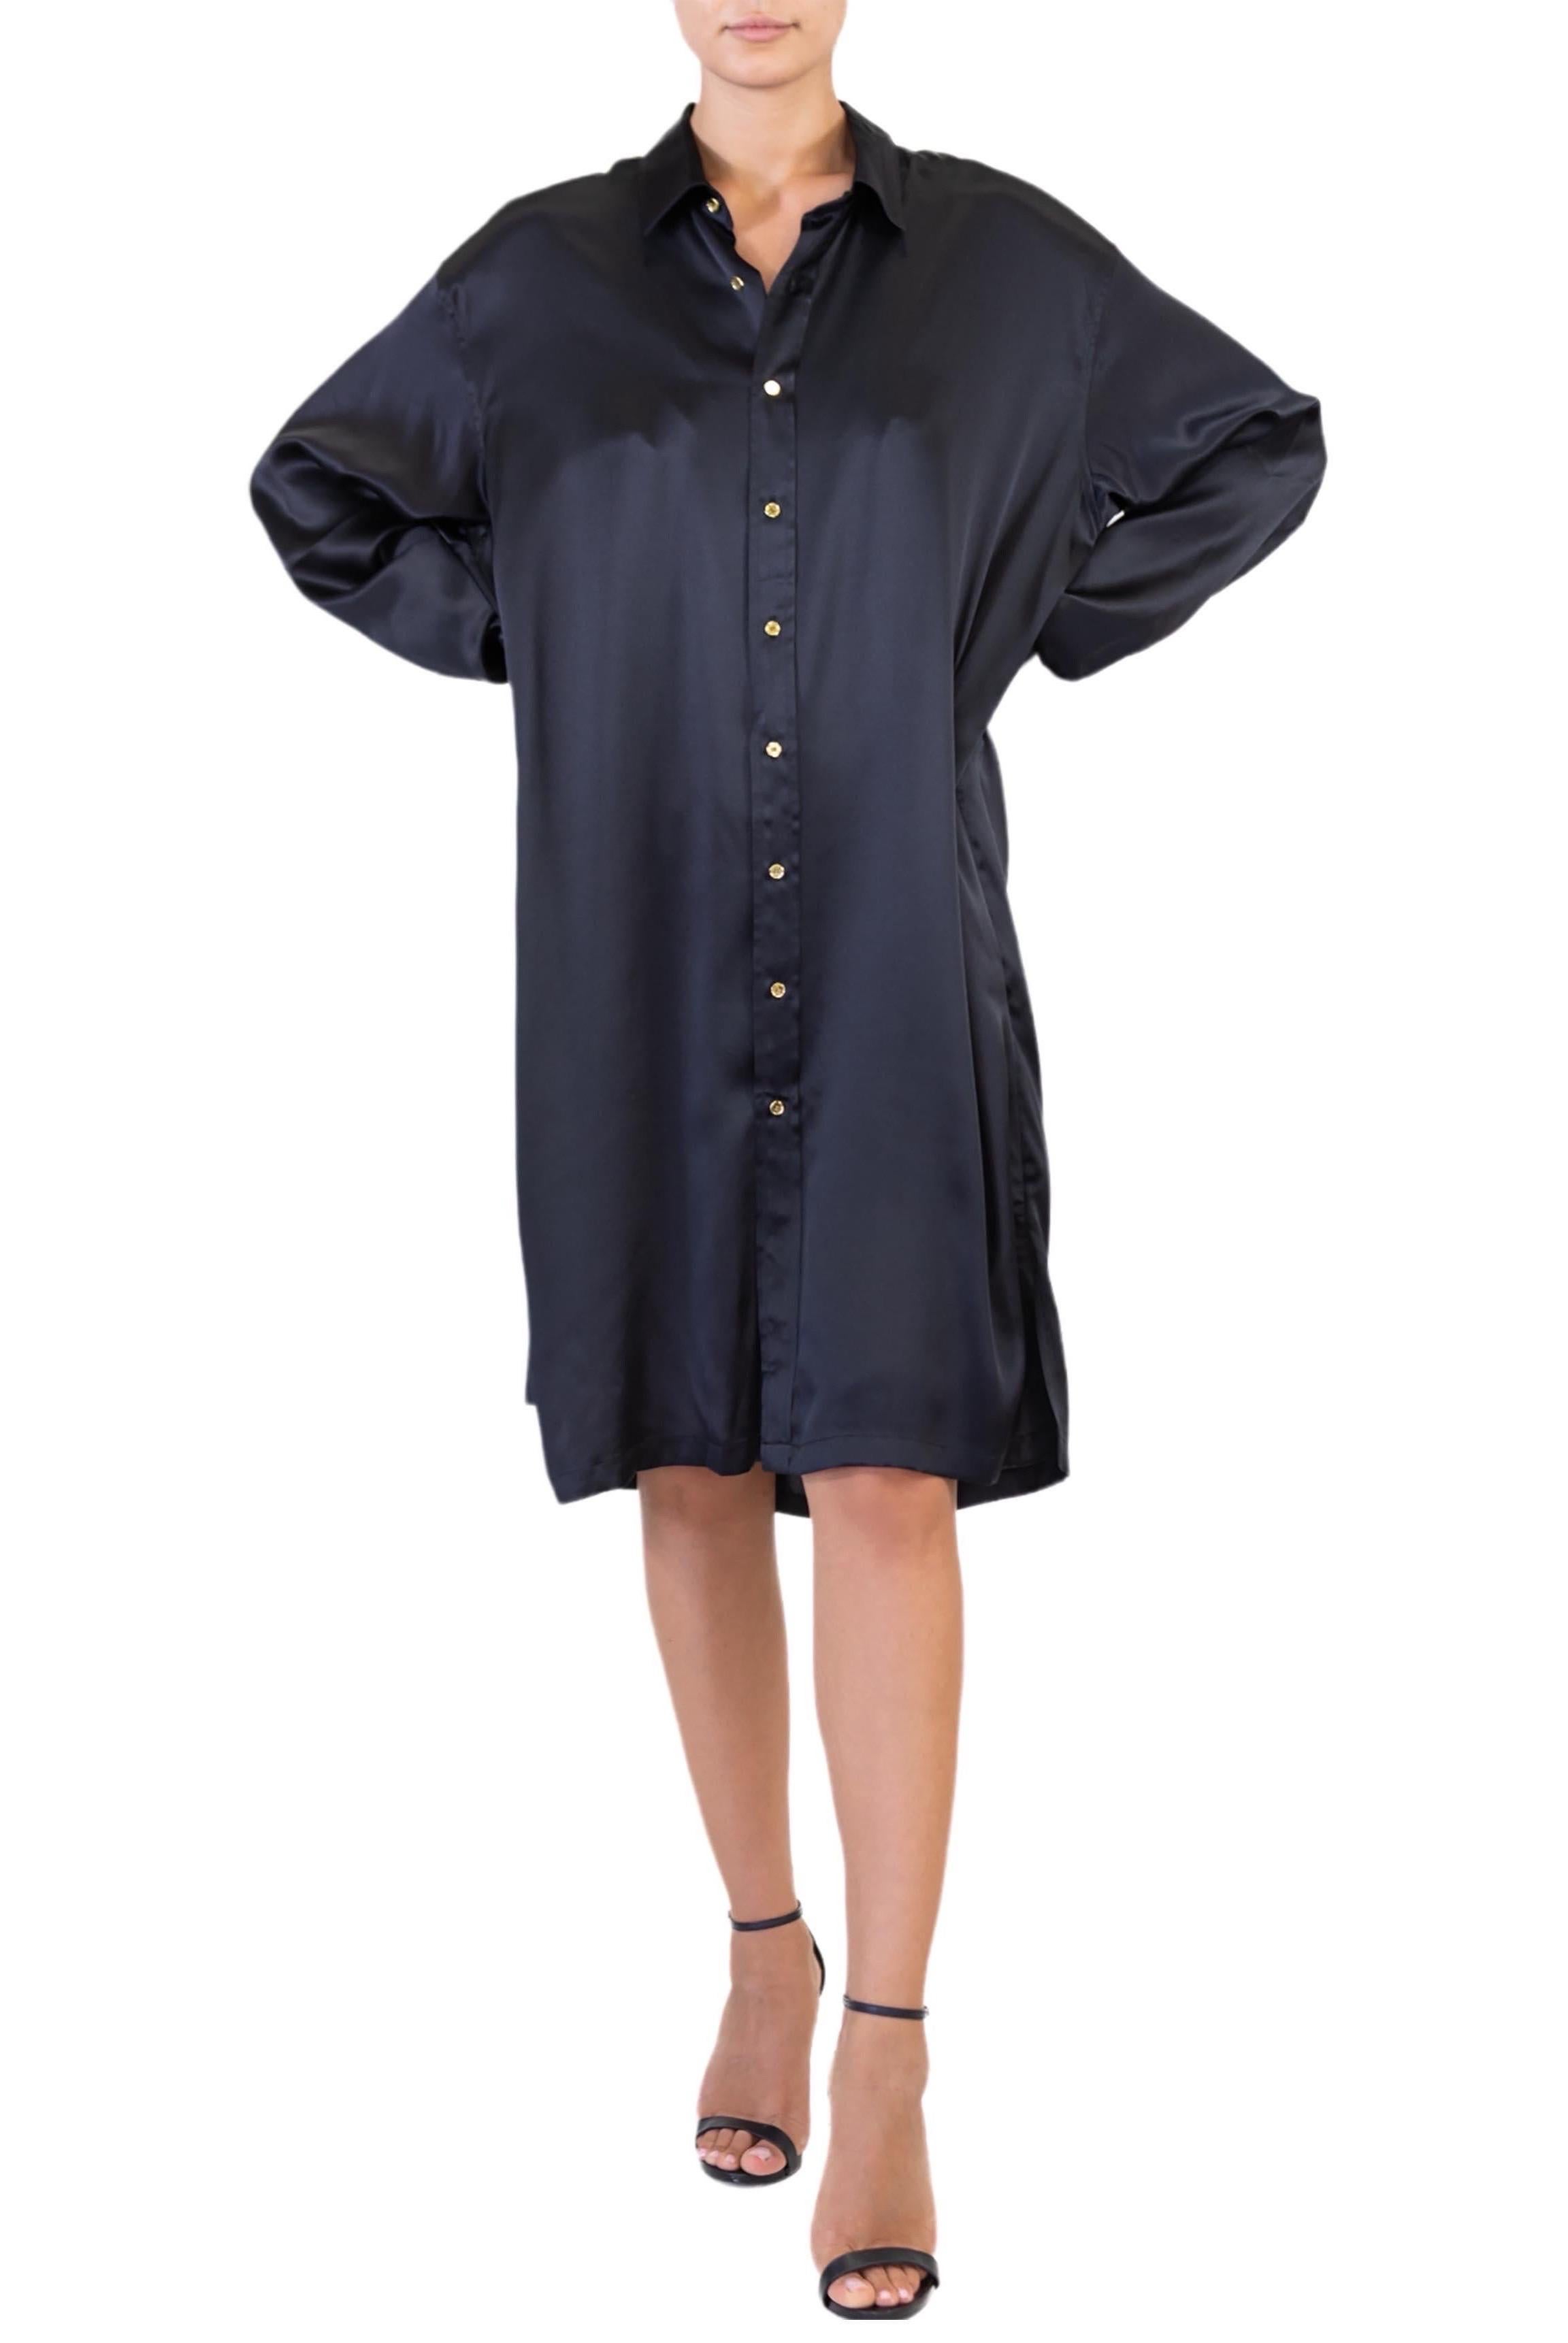 MORPHEW COLLECTION Black Silk Charmeuse Oversized Button Down Shirt Dress For Sale 6